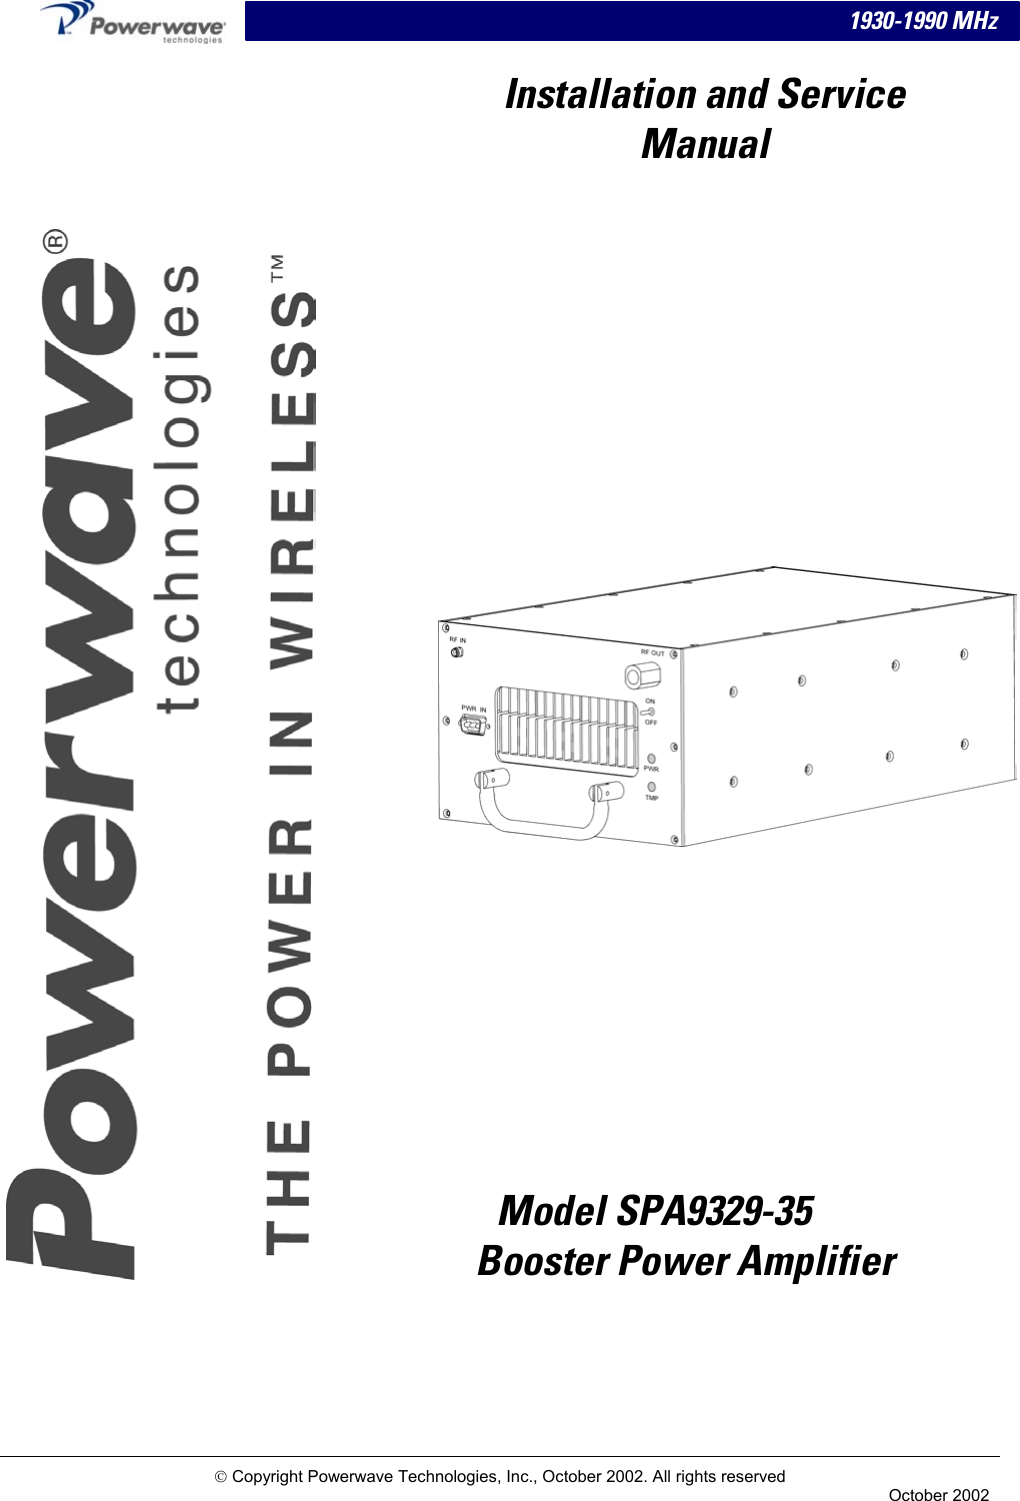 1930-1990 MHz     Installation and Service Manual                        Model SPA9329-35  Booster Power Amplifier  Copyright Powerwave Technologies, Inc., October 2002. All rights reserved  October 2002 